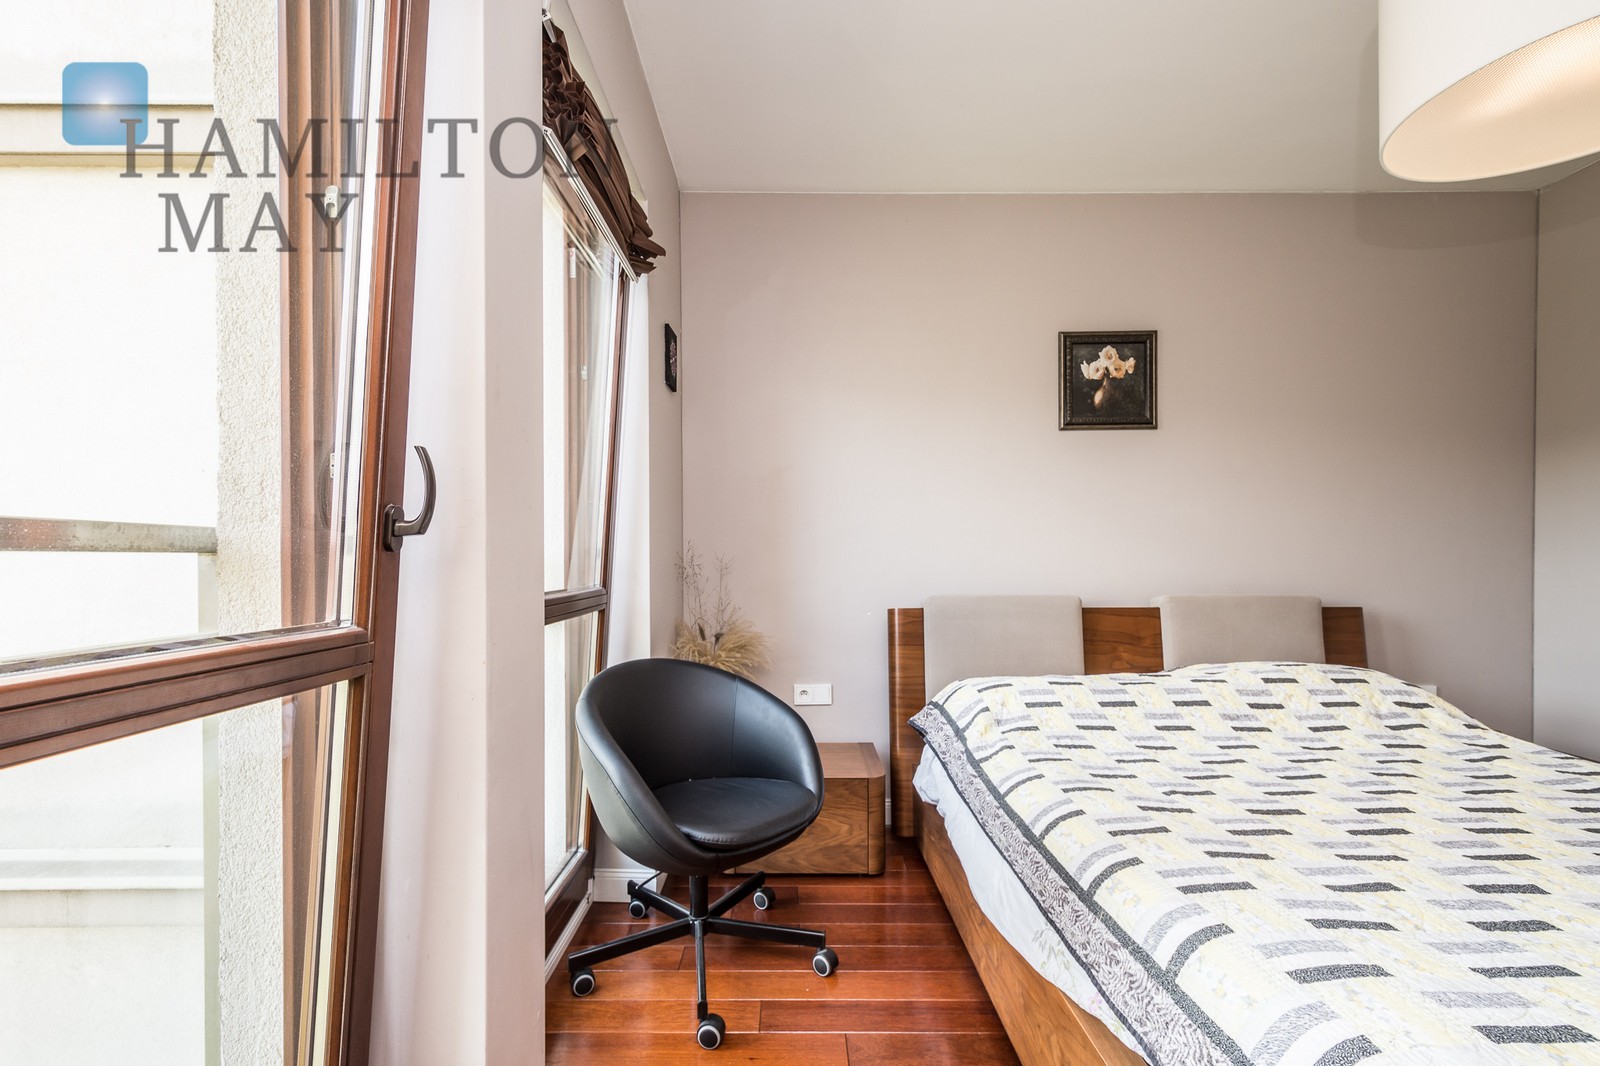 For sale, a comfortably furnished apartment located in the Garden Residence investment Krakow for sale